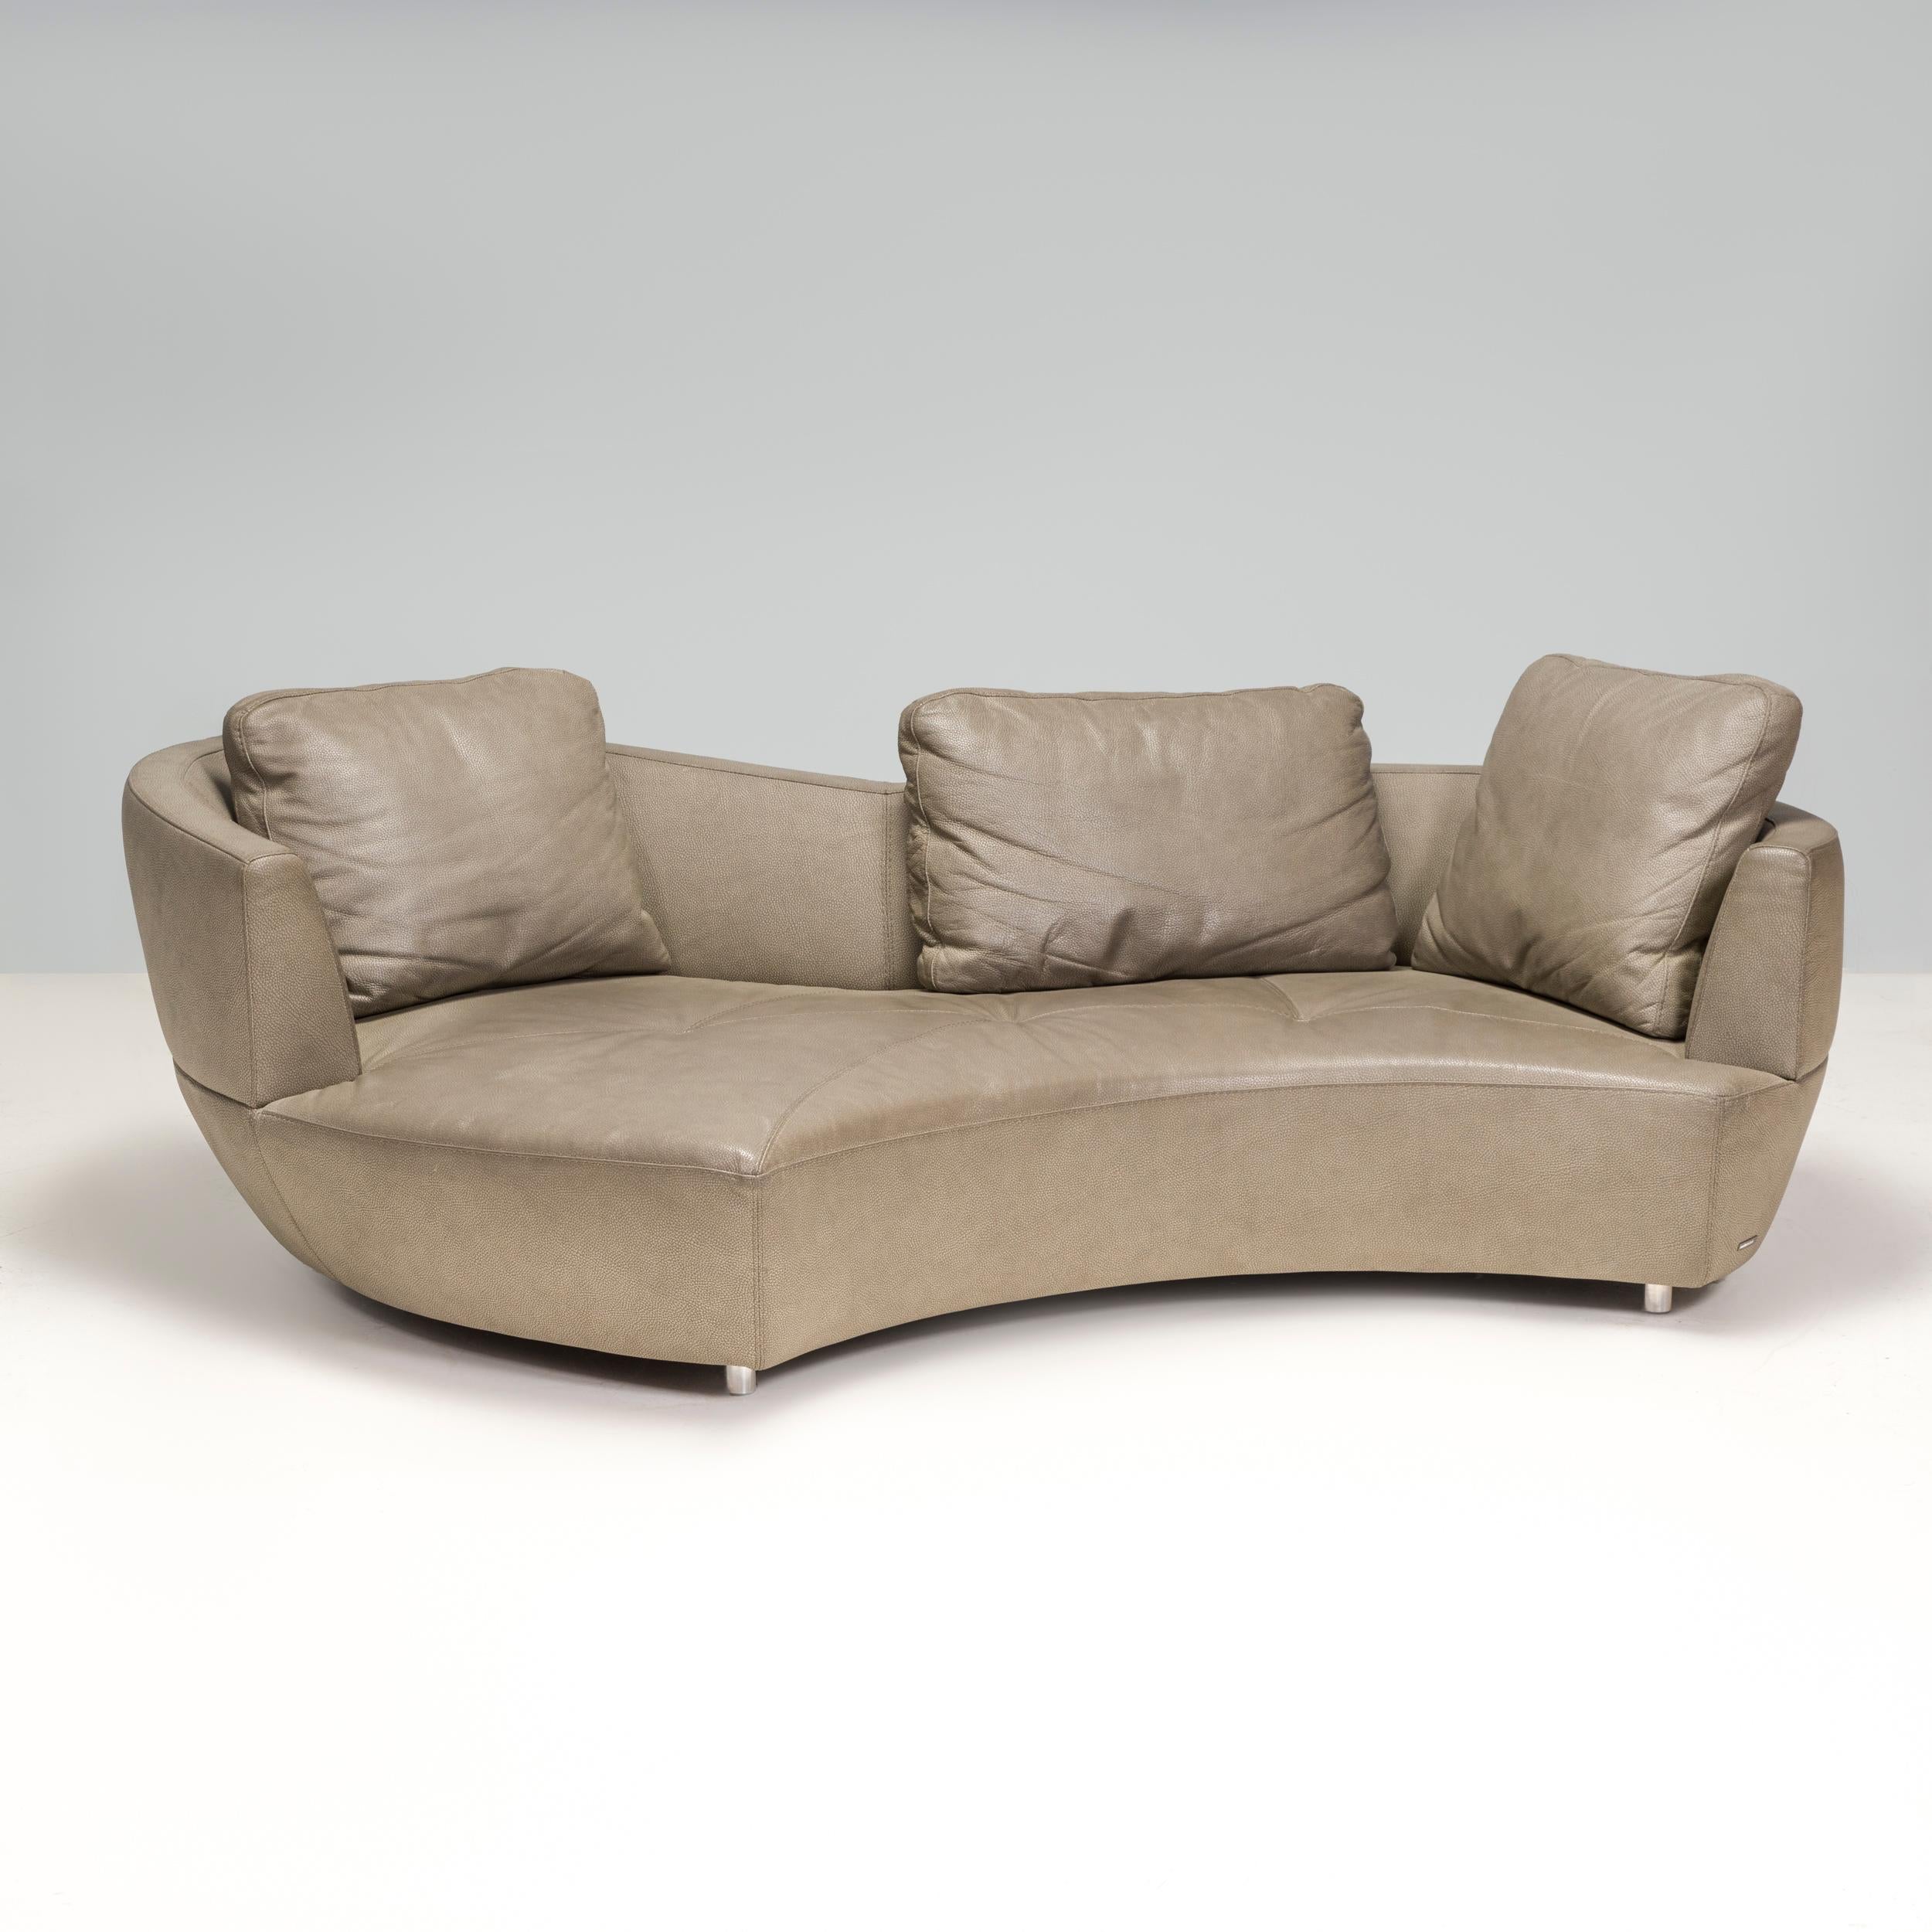 Designed by Gabriele Assmann & Alfred Kleene for Roche Bobois, the Digital sofa perfectly balances comfort with elegant modern design.

These comfortable sofas have a very unique shape that creates a variety of seating depths. At the ends, the back